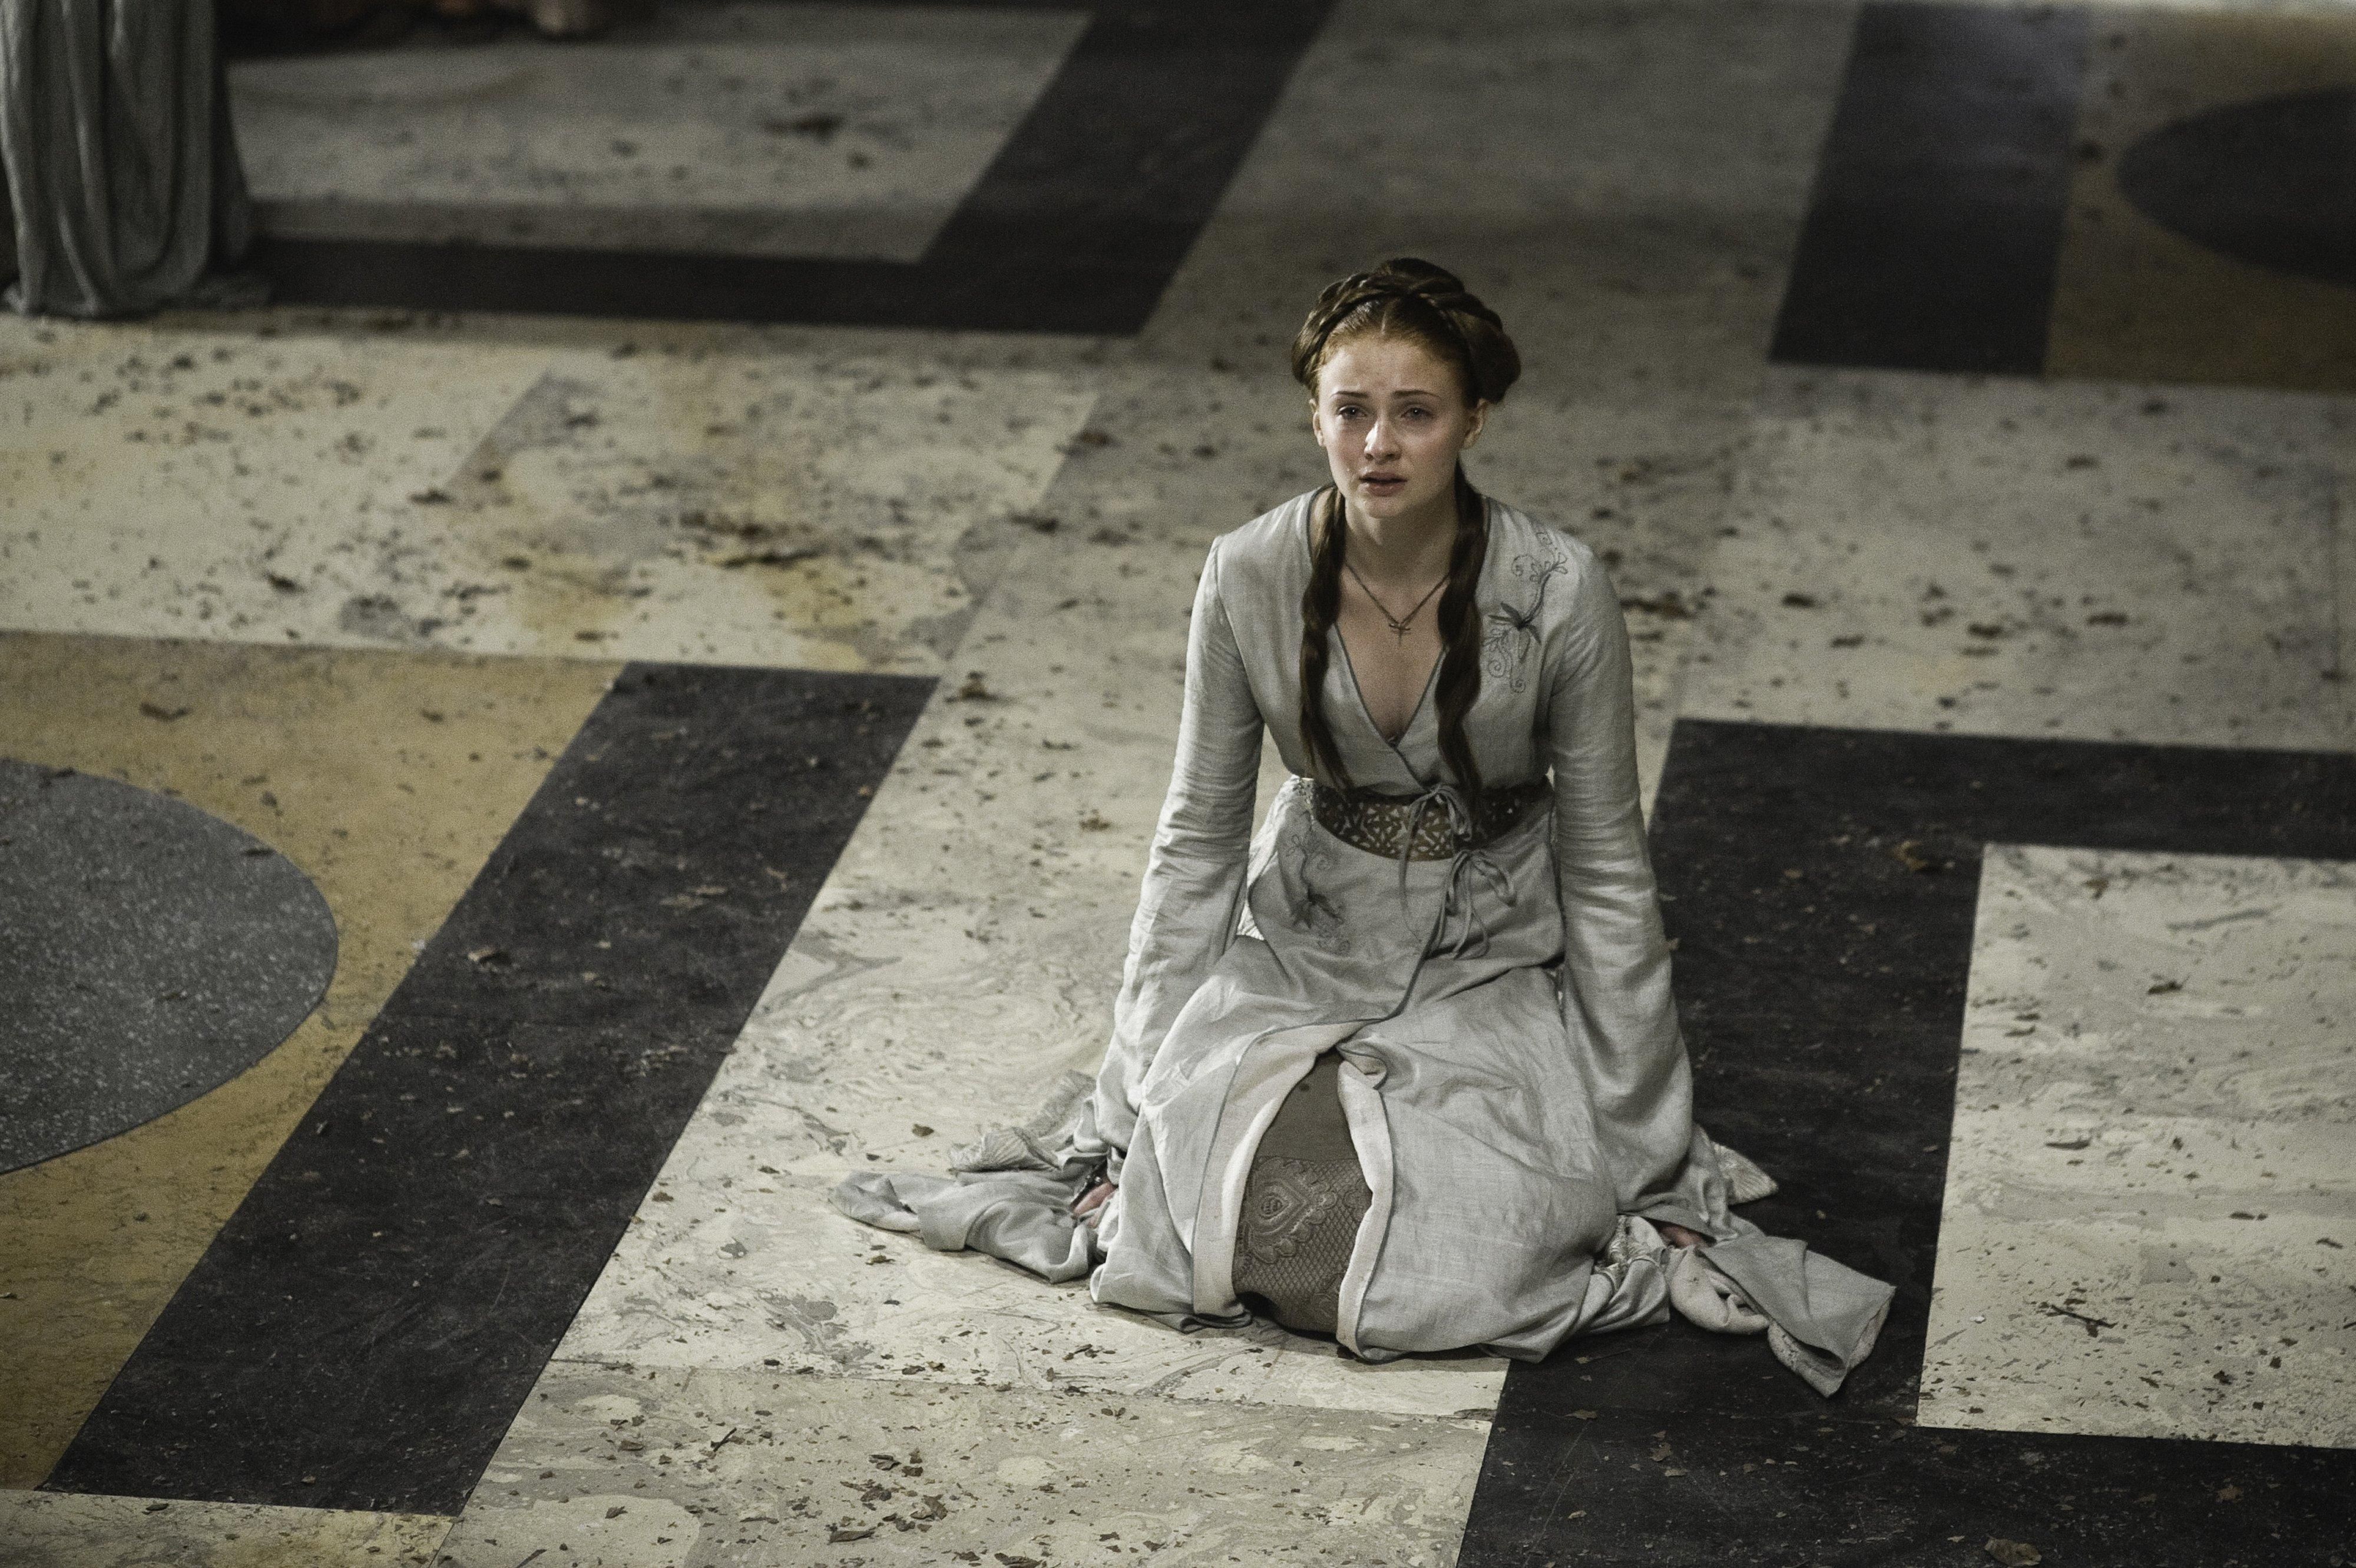 Game Of Thrones 5 Worst Things That Have Happened To Sansa (And The 5 Worst Things Shes Done)